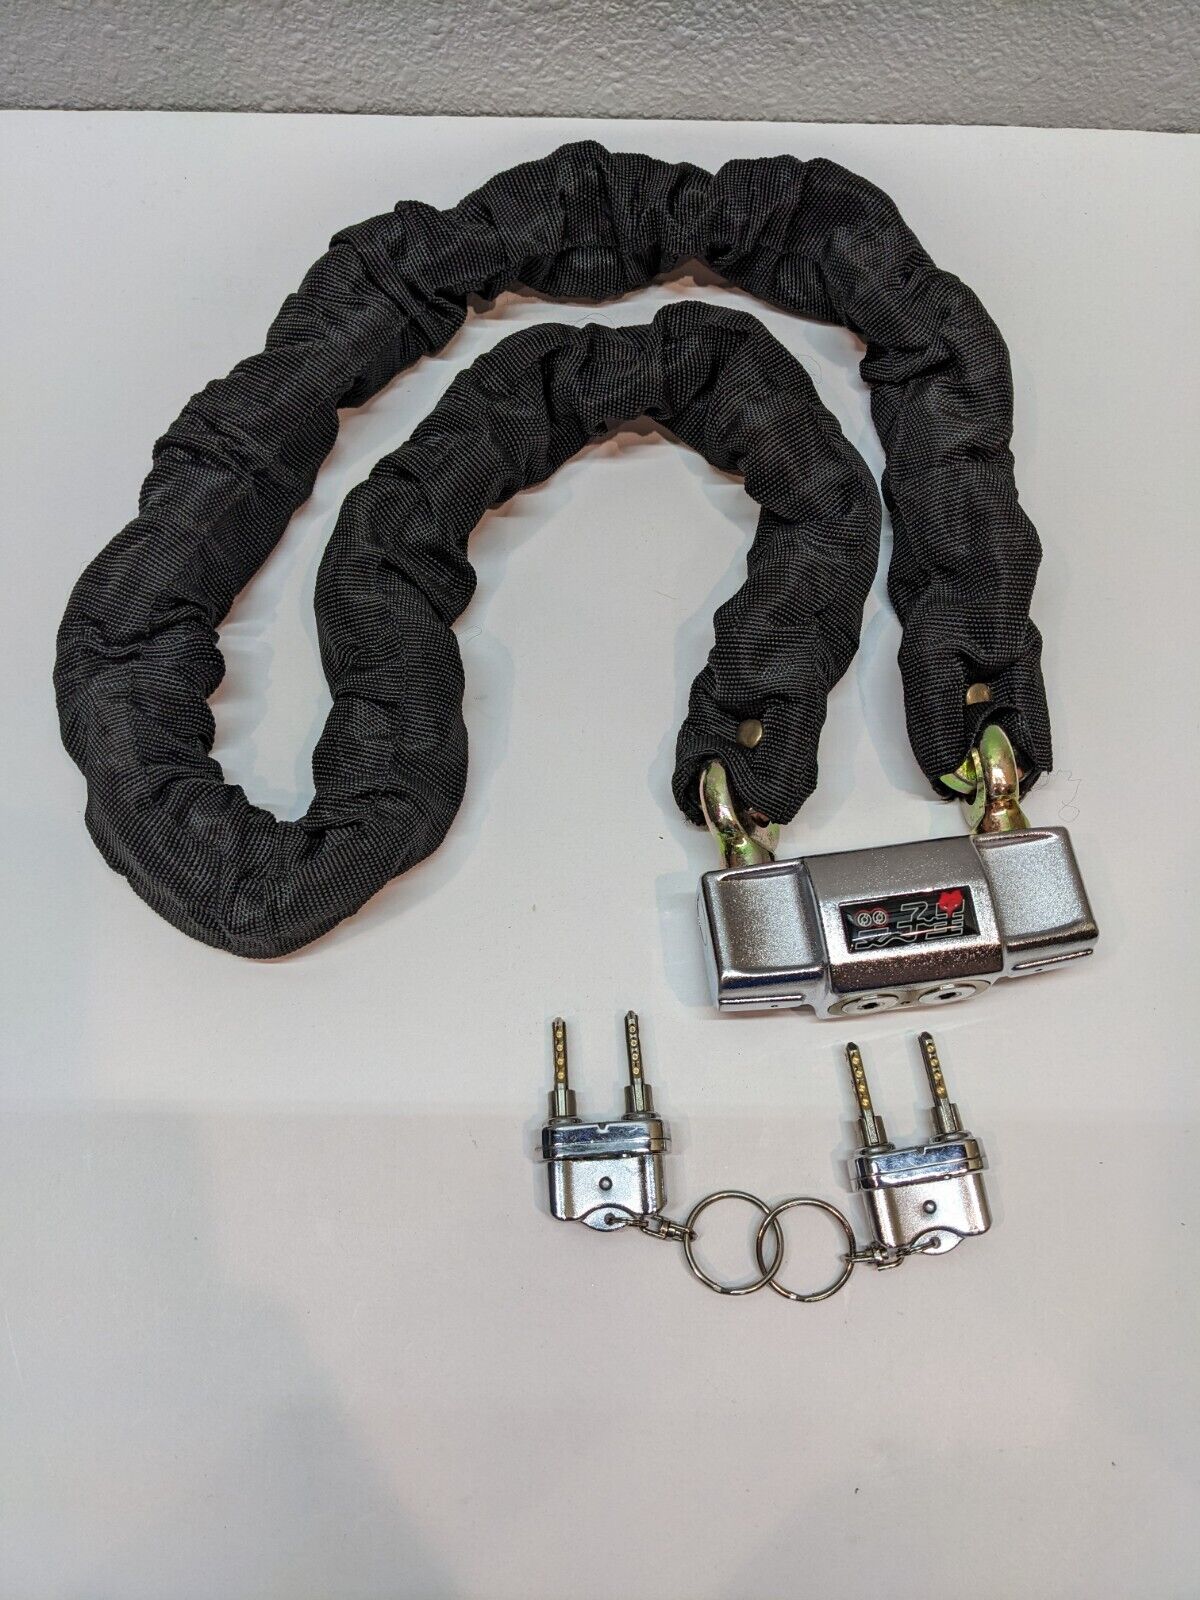 Heavy Duty Chain Lock Double Key Shank and Double Cylinder Manganese Steel Chain